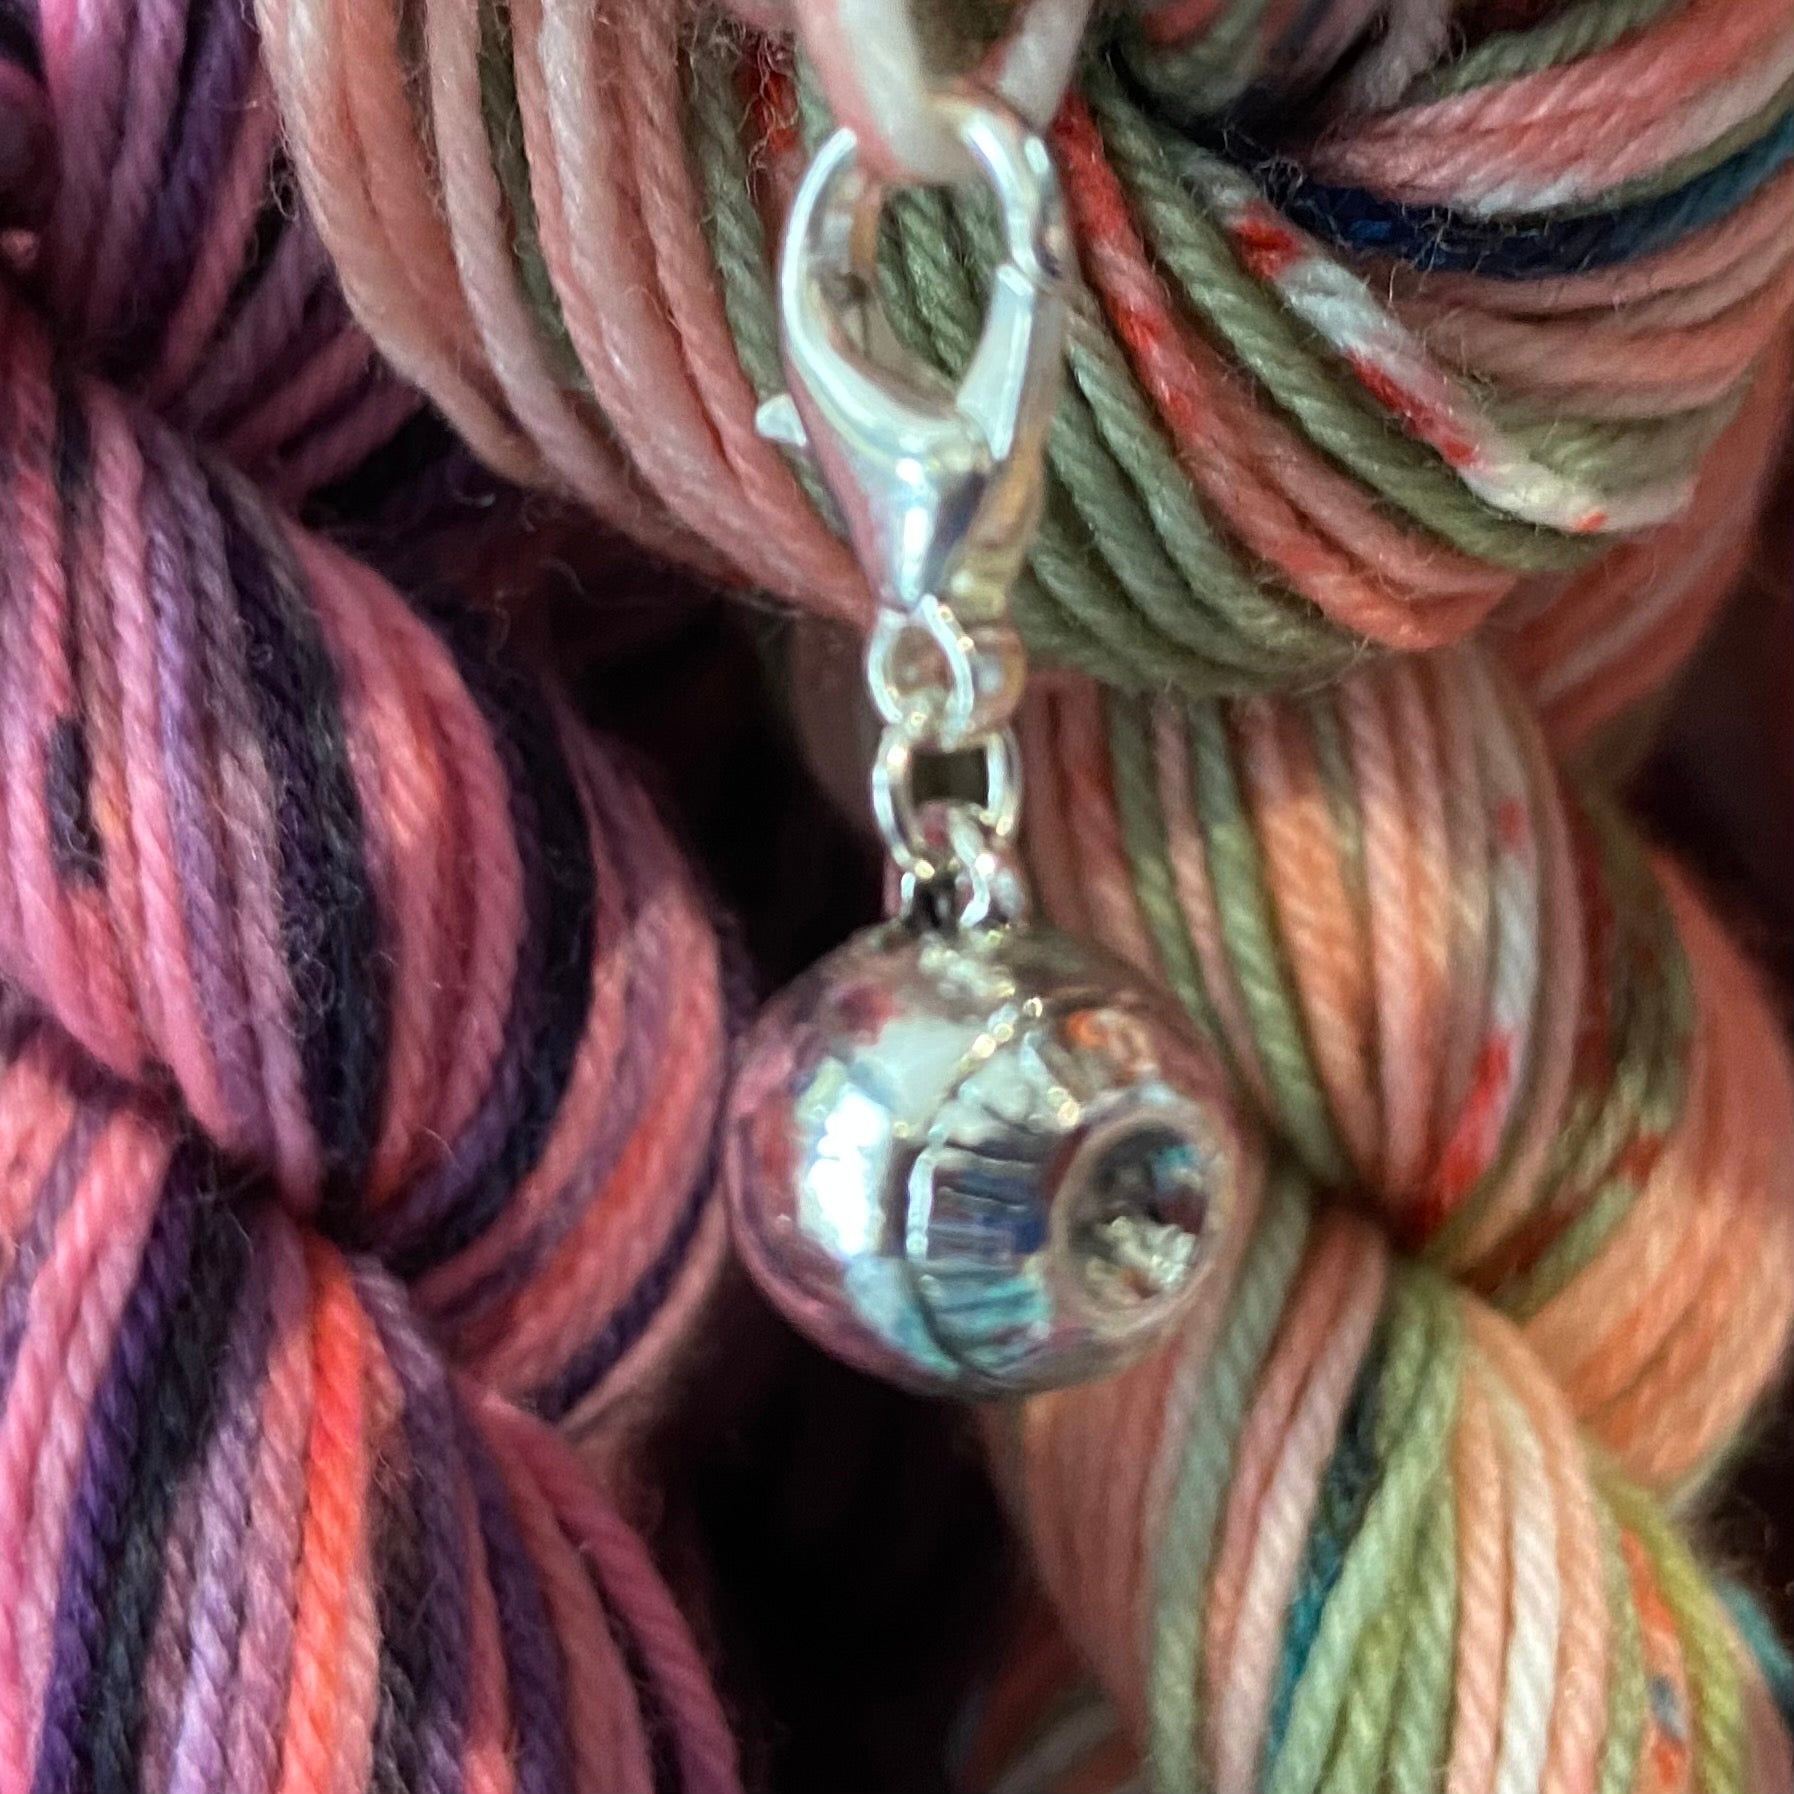 3D Floating Eyeball Snagless Stitch Marker or Clasp Place Keeper